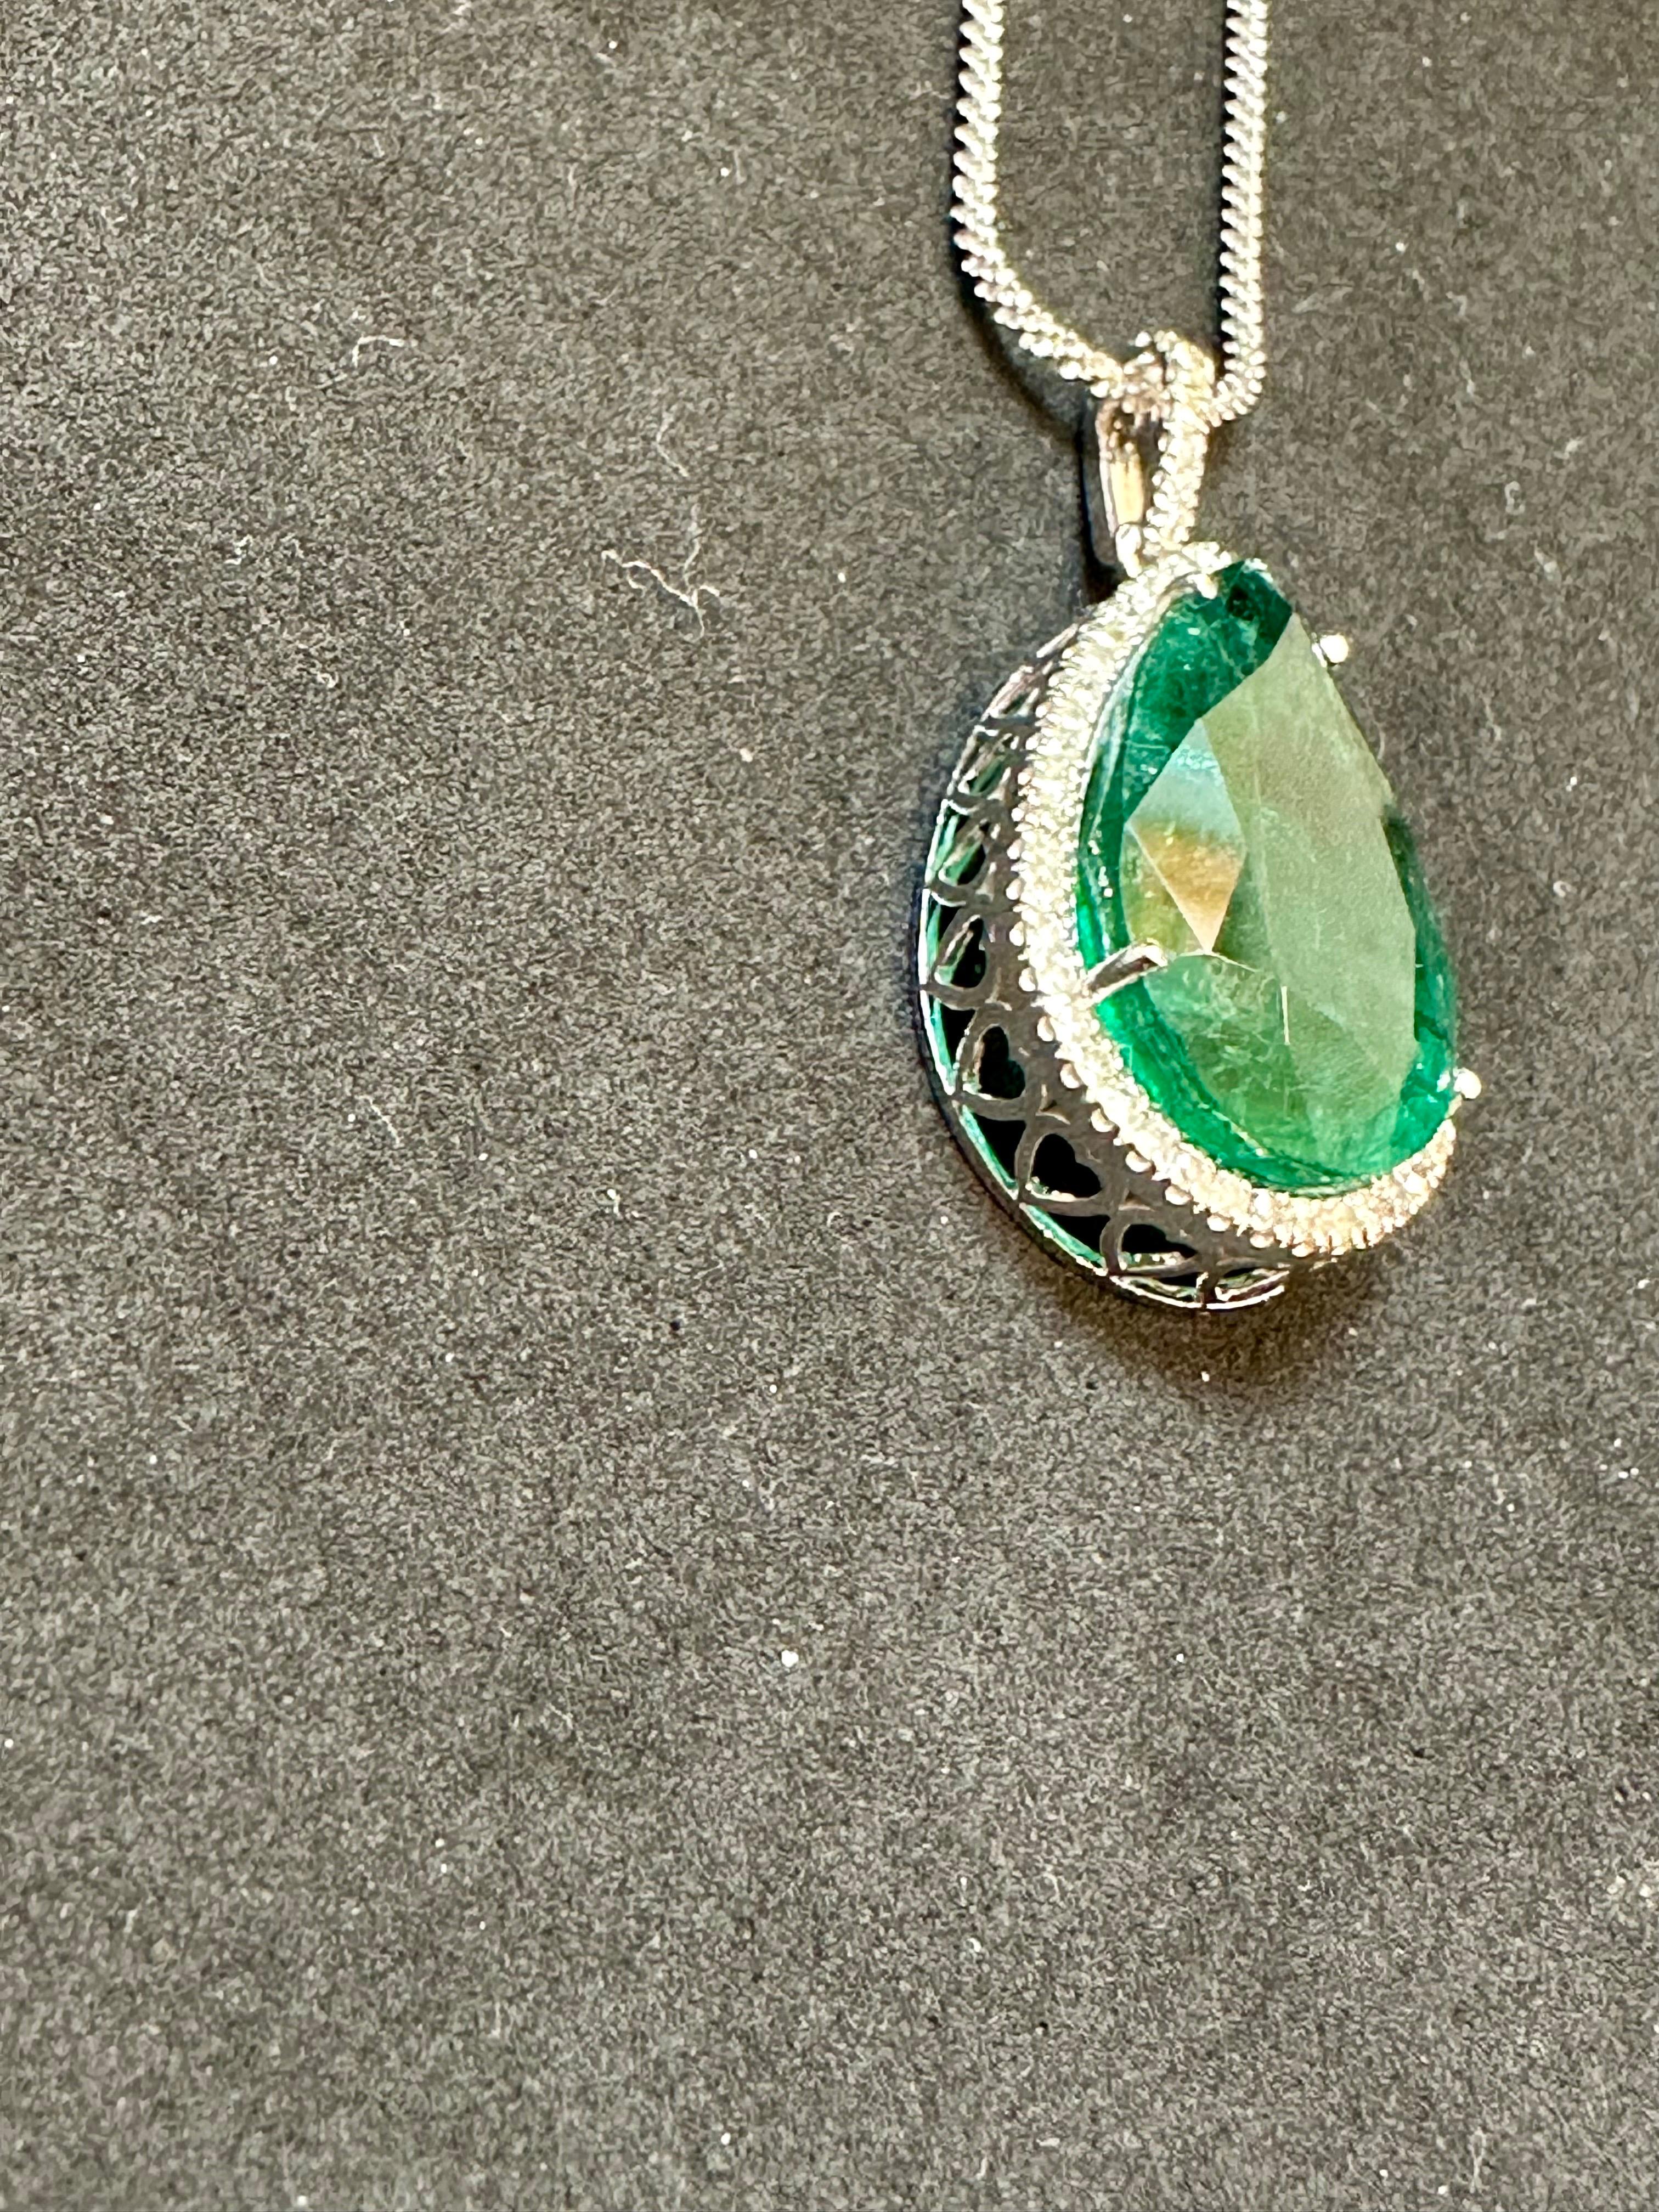 19 Ct Pear Cut Emerald & 1 Ct Diamond Halo Pendent/Necklace 14 KW Gold Chain In Excellent Condition For Sale In New York, NY